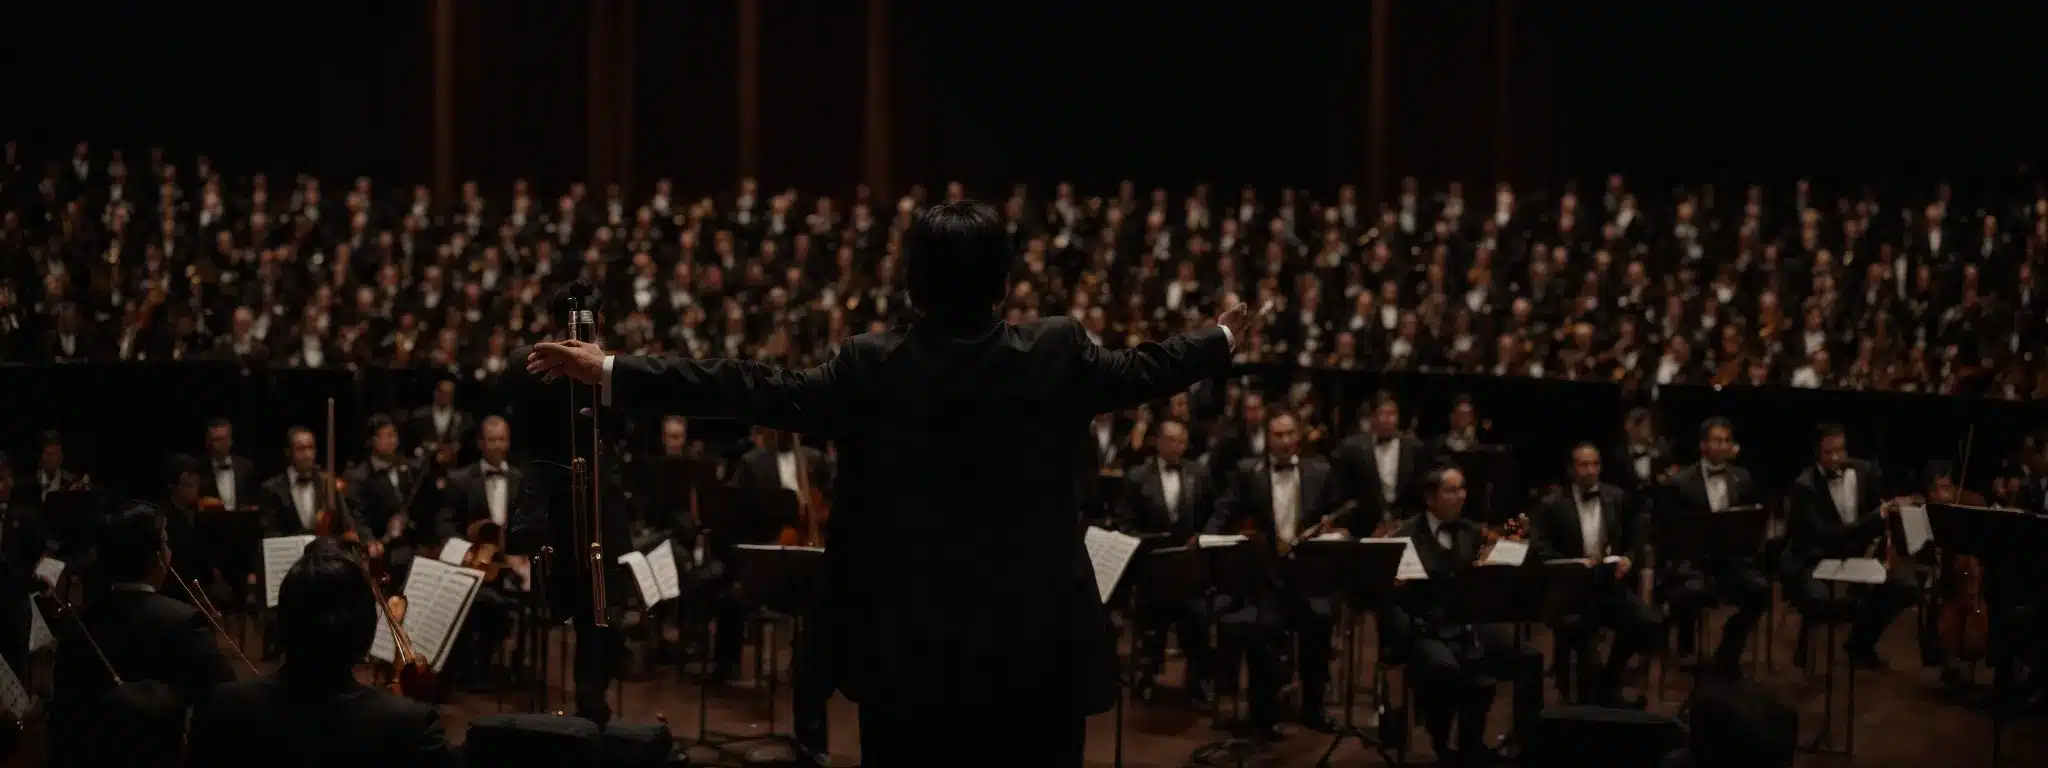 A Conductor Stands Poised With A Baton Over An Orchestra On An Open-Air Stage At Dusk, Symbolizing Strategic Coordination Across Various Platforms.